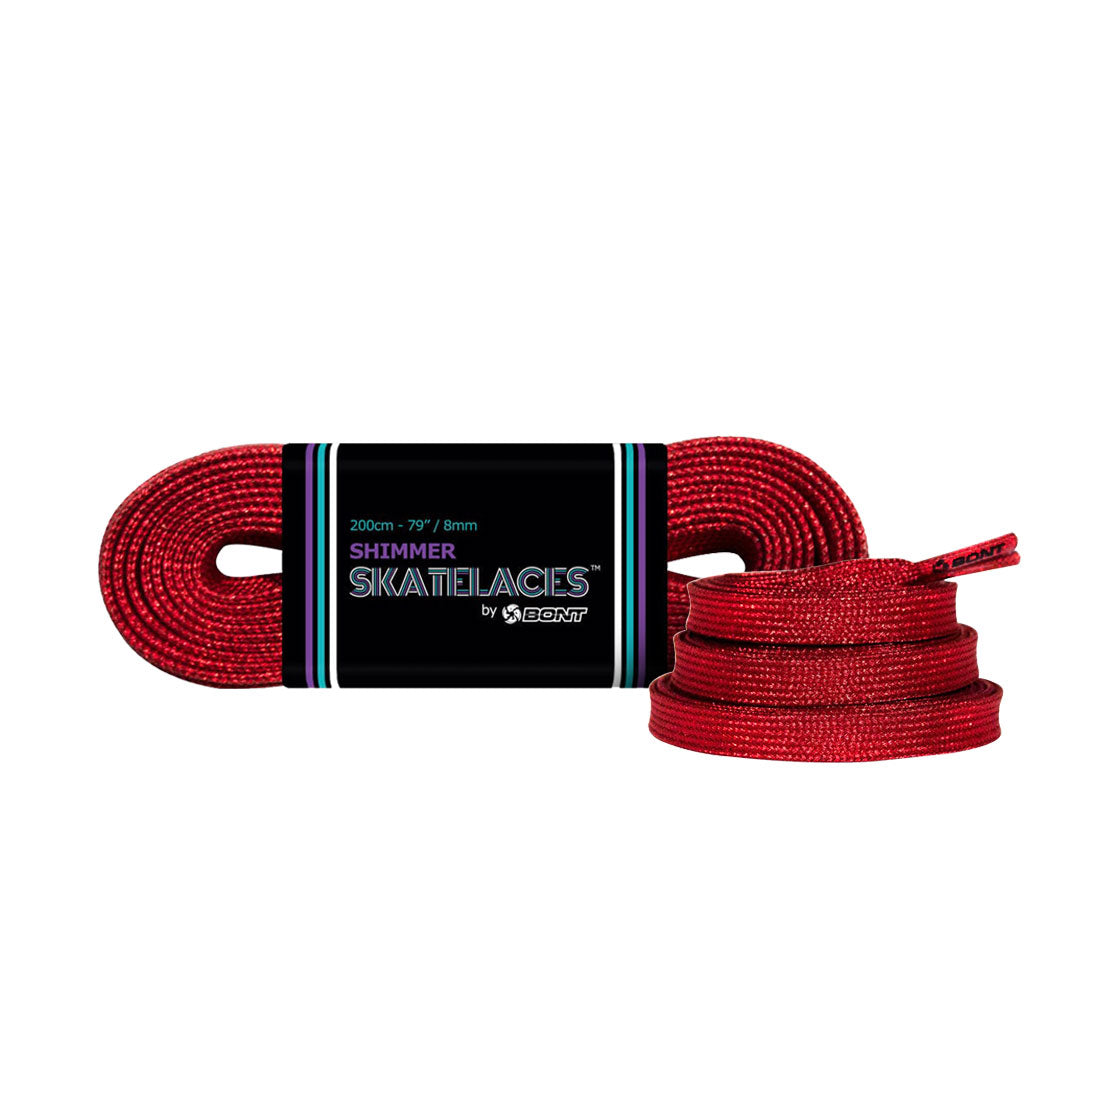 Bont Shimmer 8mm Laces - 245cm/96in Very Cherry Red Laces